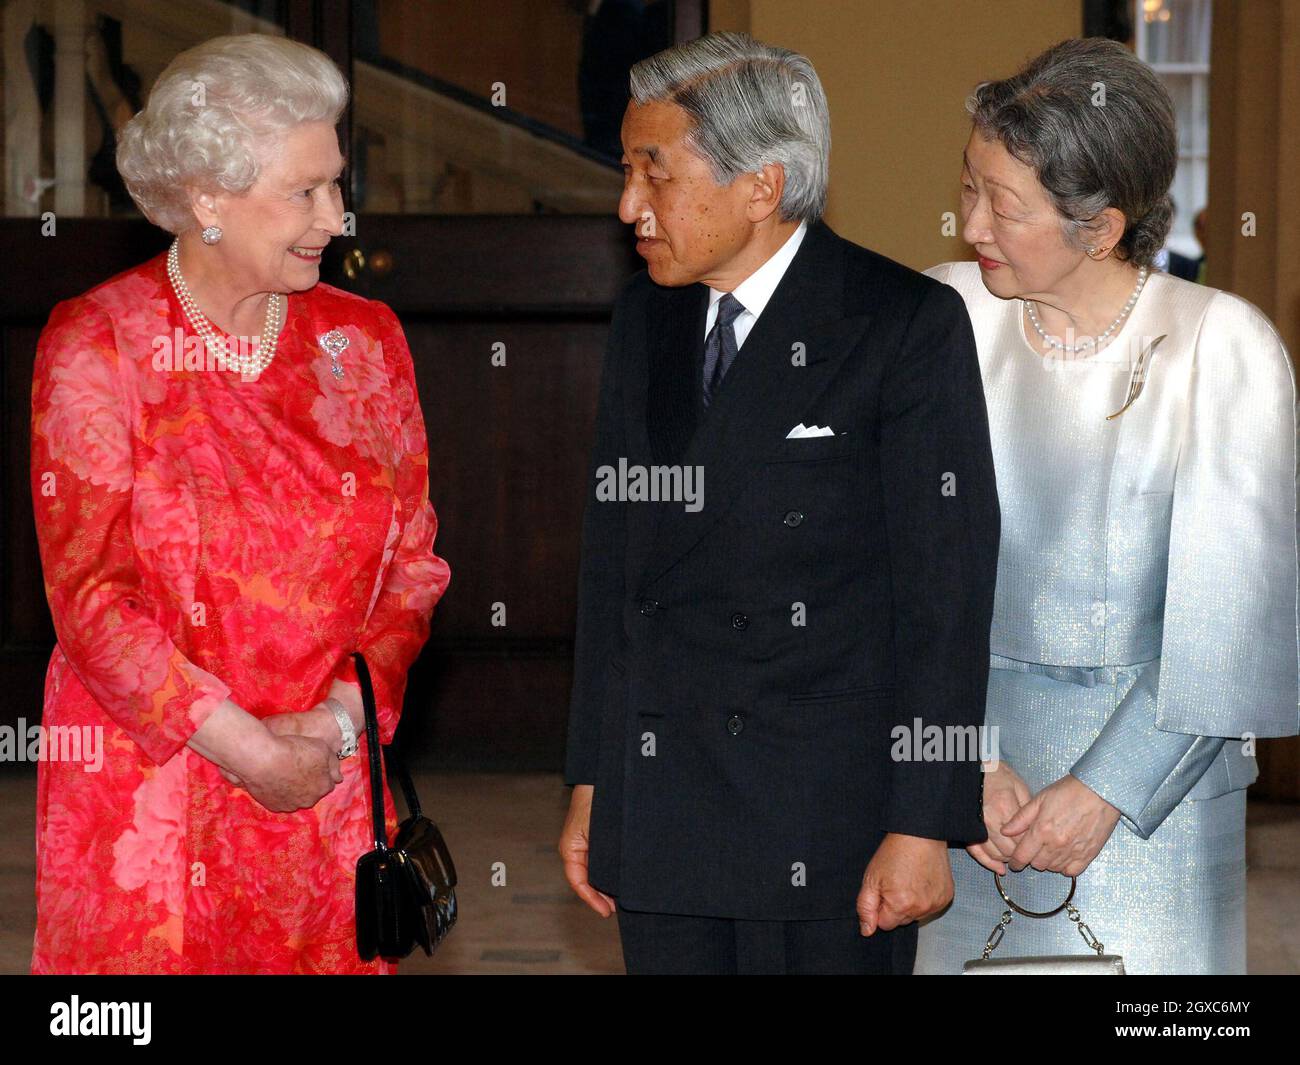 Queen Elizabeth II greets Emperor Akihito and Empress Michiko of Japan at the grand entrance of Buckingham Palace in London on May 29, 2007. Stock Photo